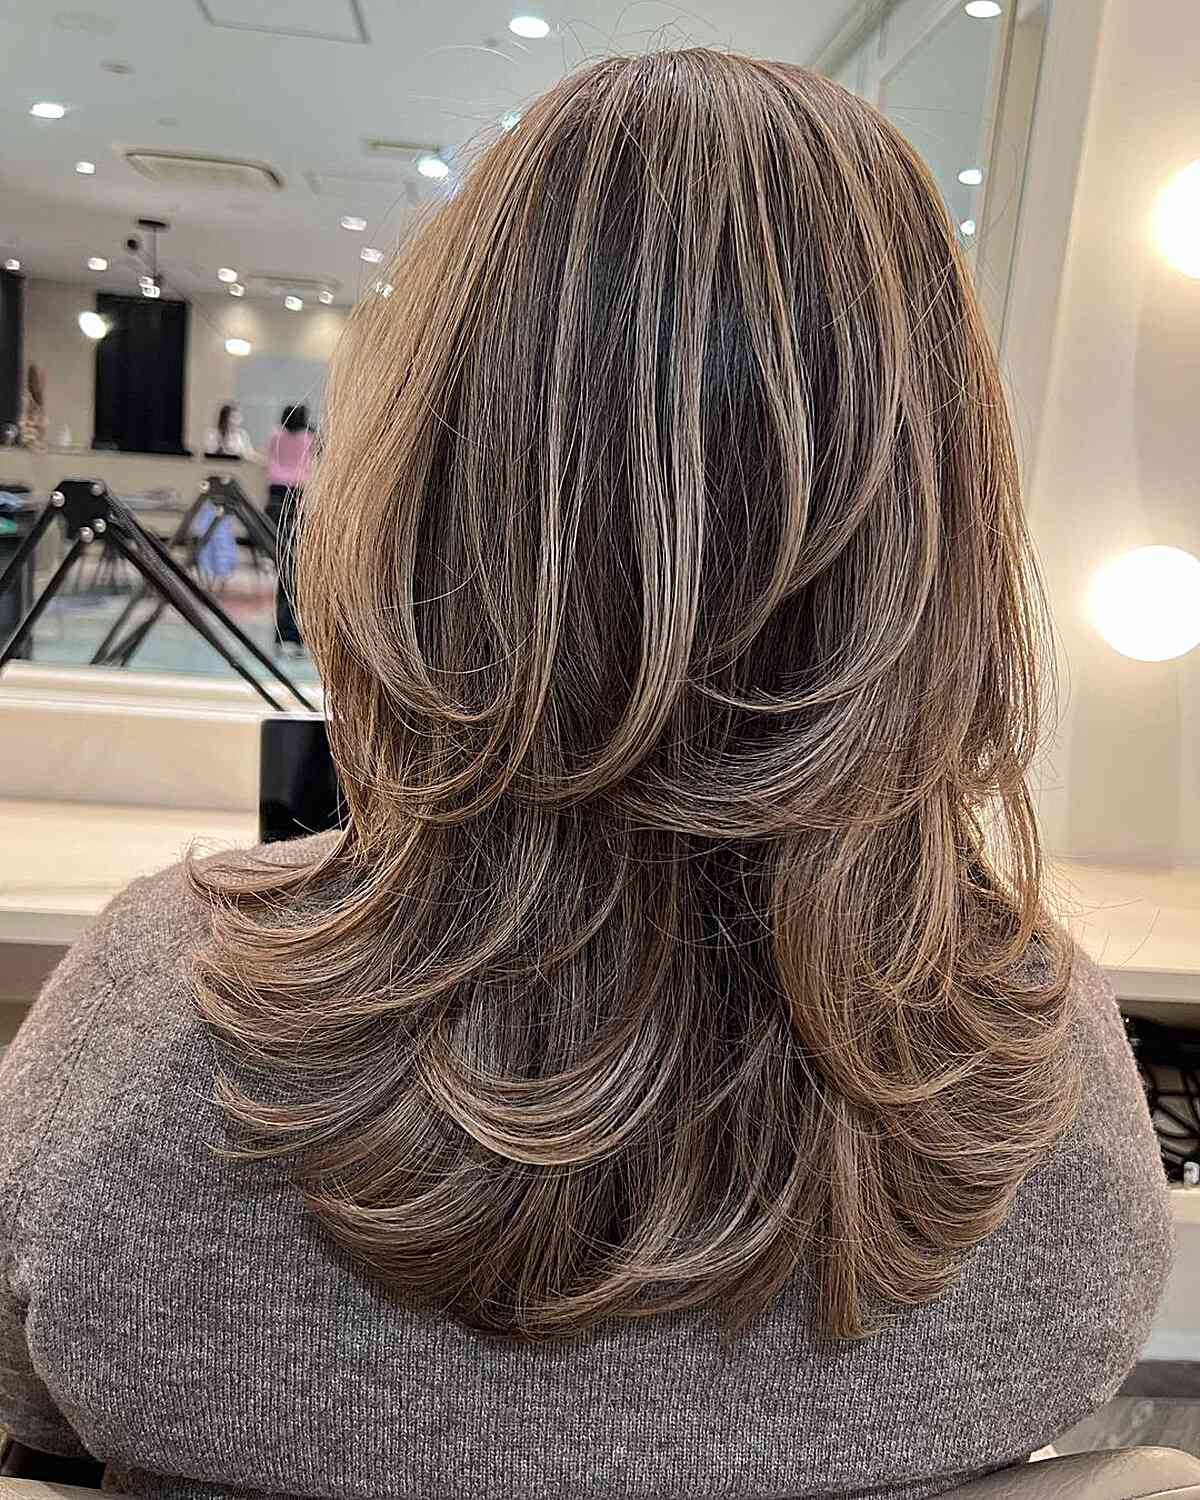 Medium Layered Octopus Butterfly Cut with Highlights